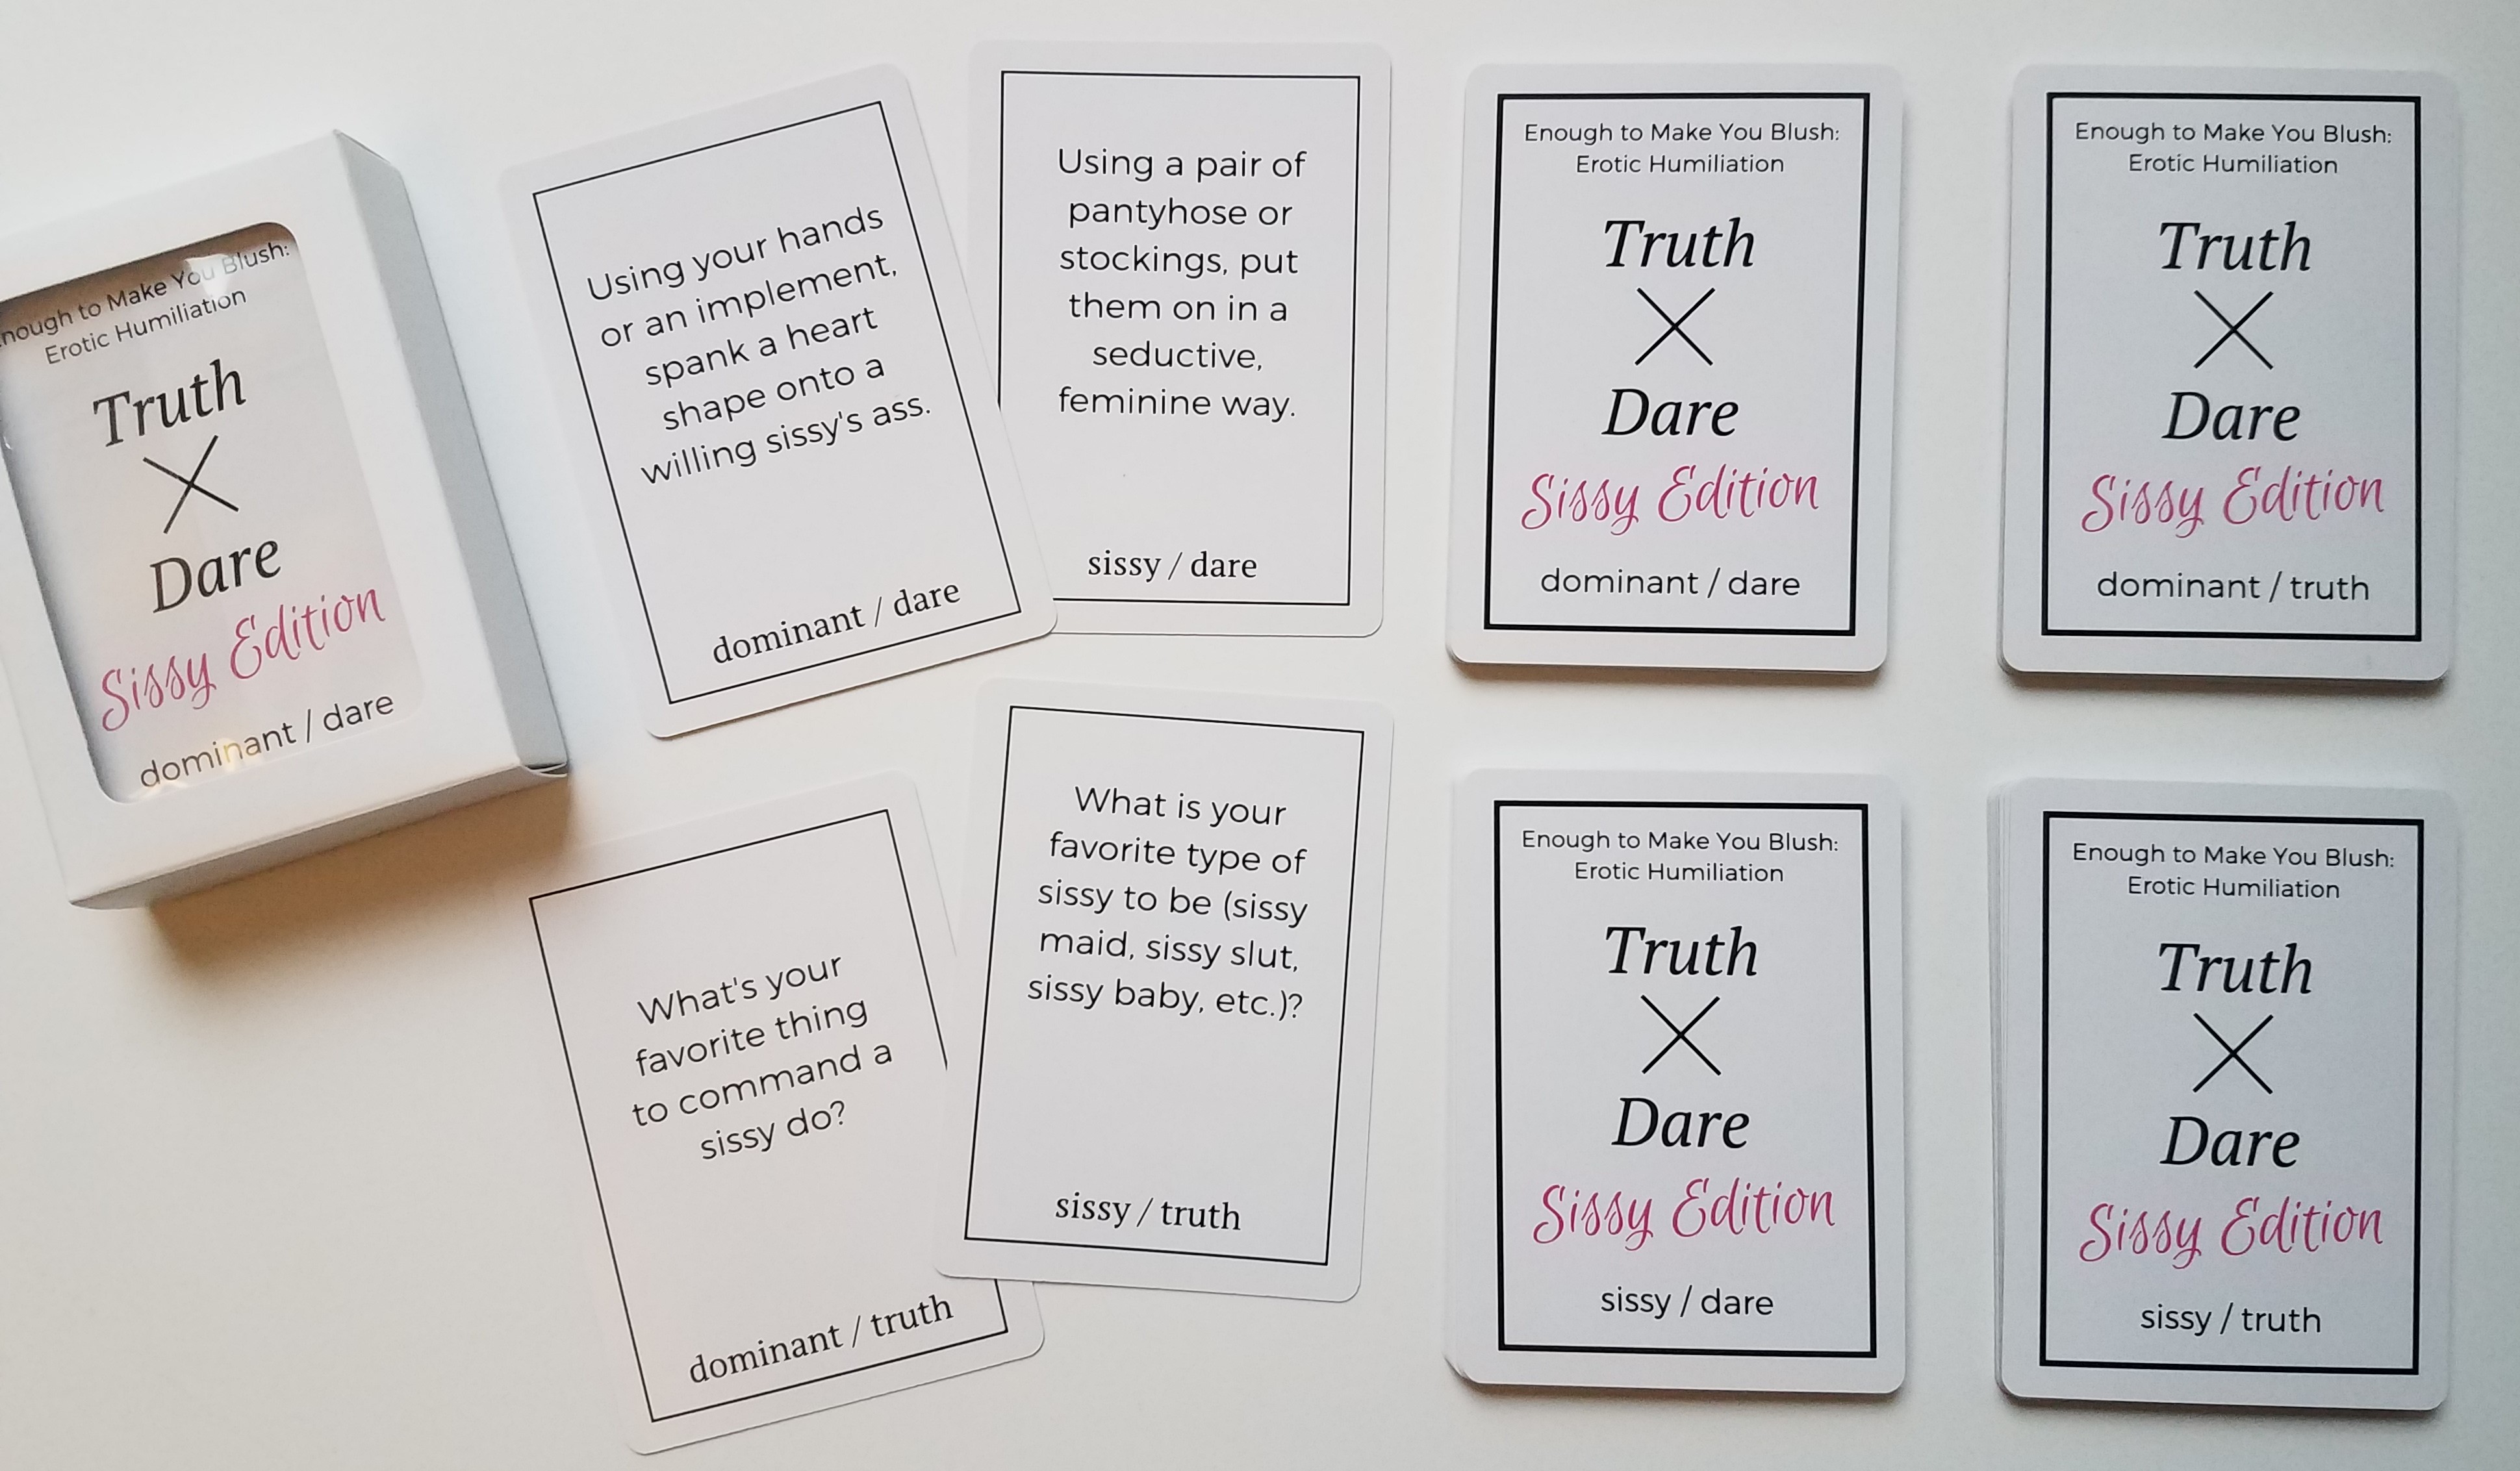 Dirty truth or dare questions for adults.